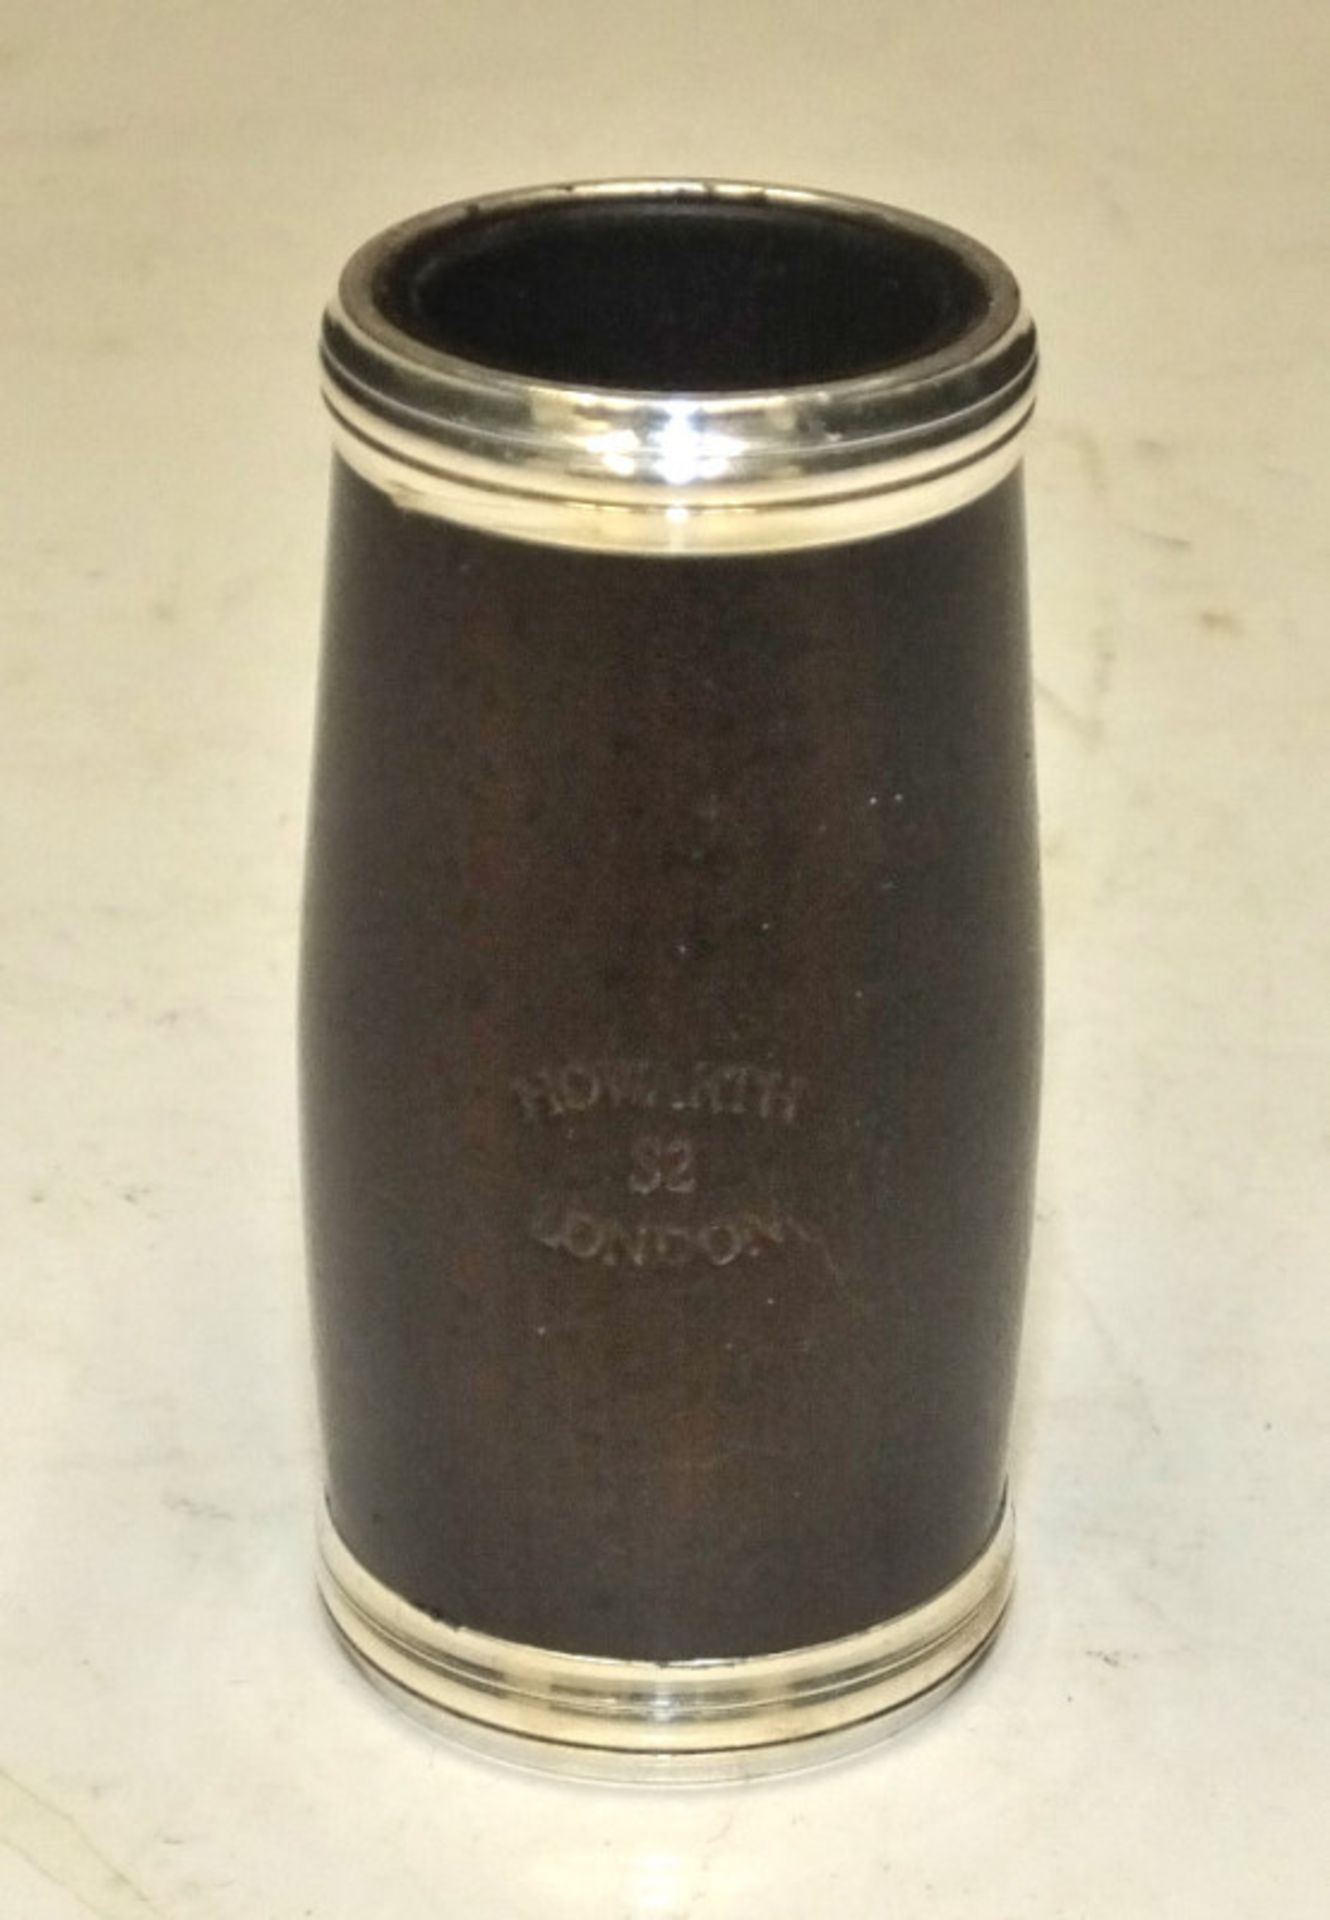 Howarth S2 Clarinet in case - Serial Number - 2153. - Image 13 of 22